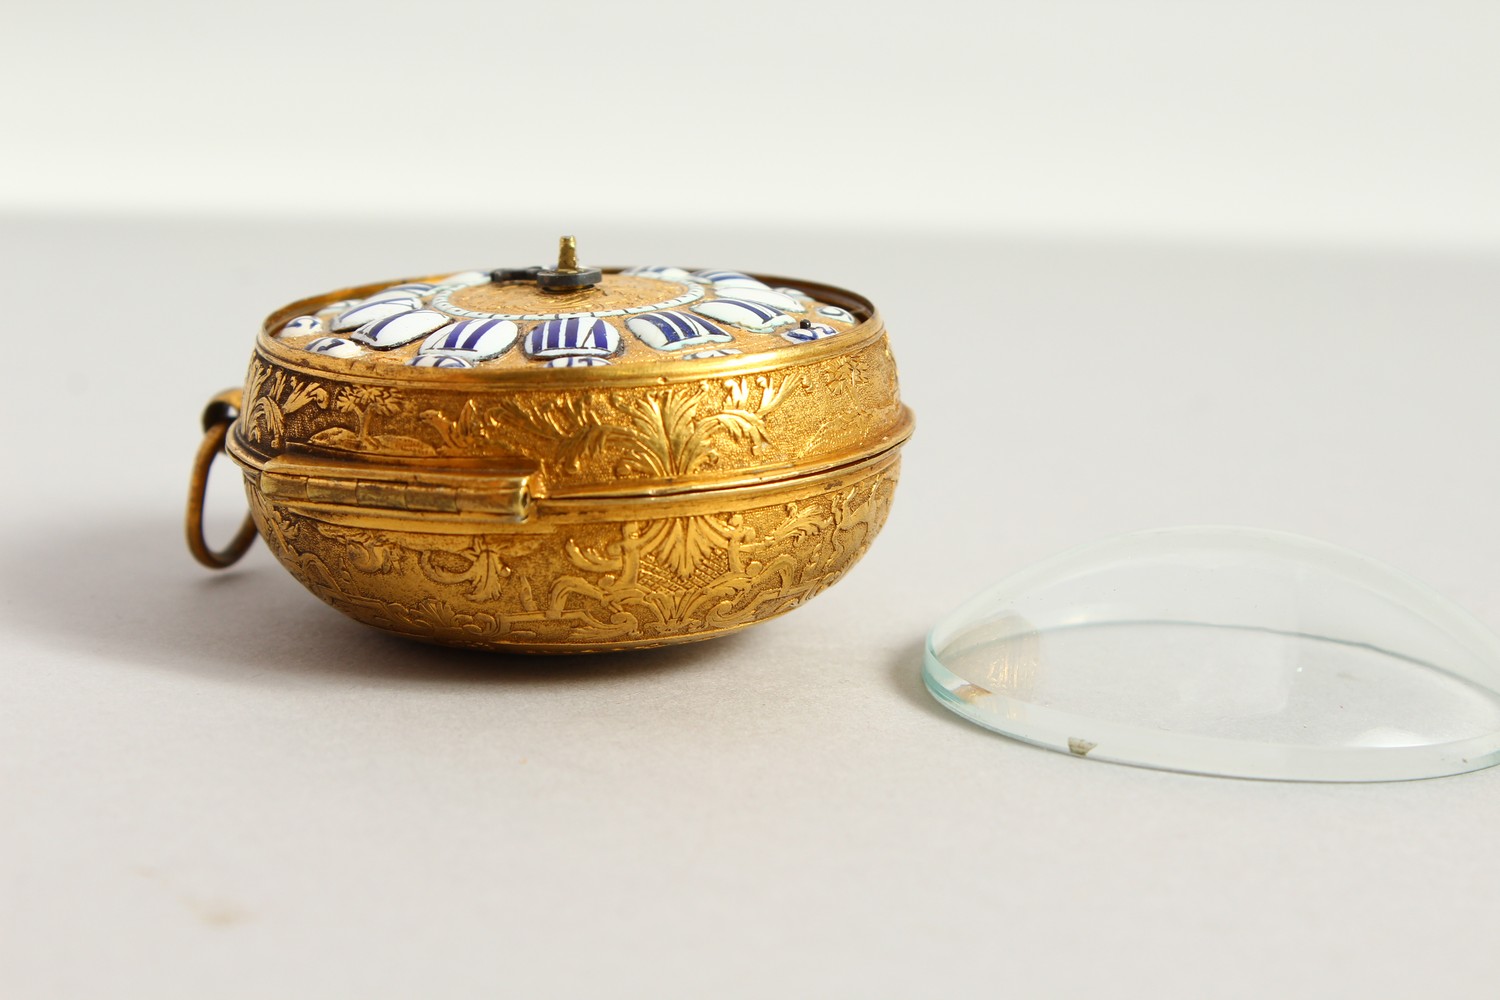 A VERY GOOD EARLY 18TH CENTURY FRENCH ONION WATCH by JOLLY, PARIS, with verge movement, the face - Image 2 of 11